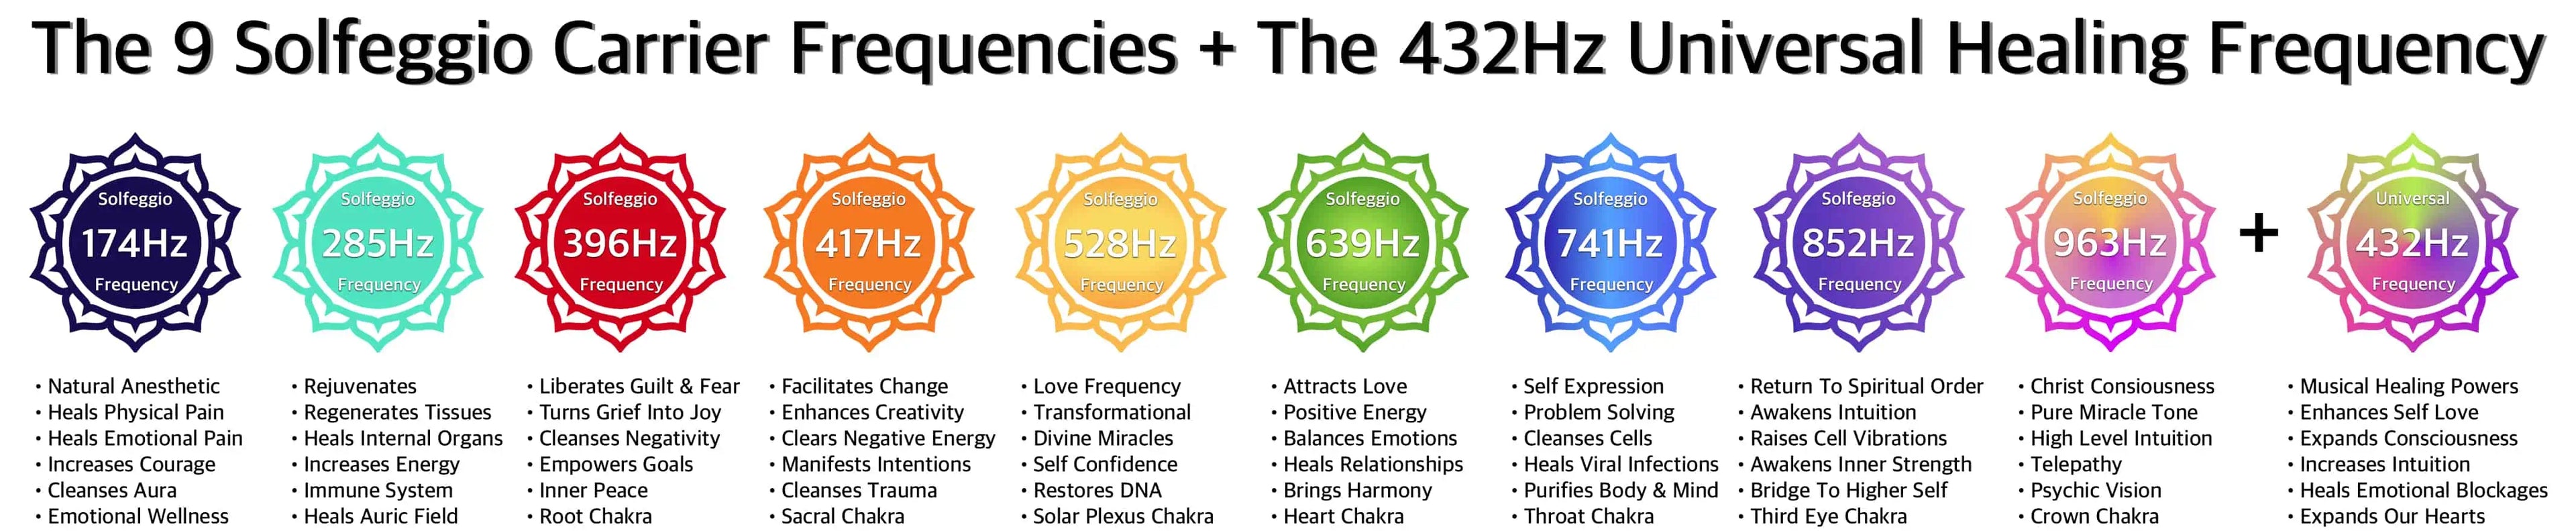 The 9 Solfeggio Frequencies Plus 432Hz Universal Healing Frequency